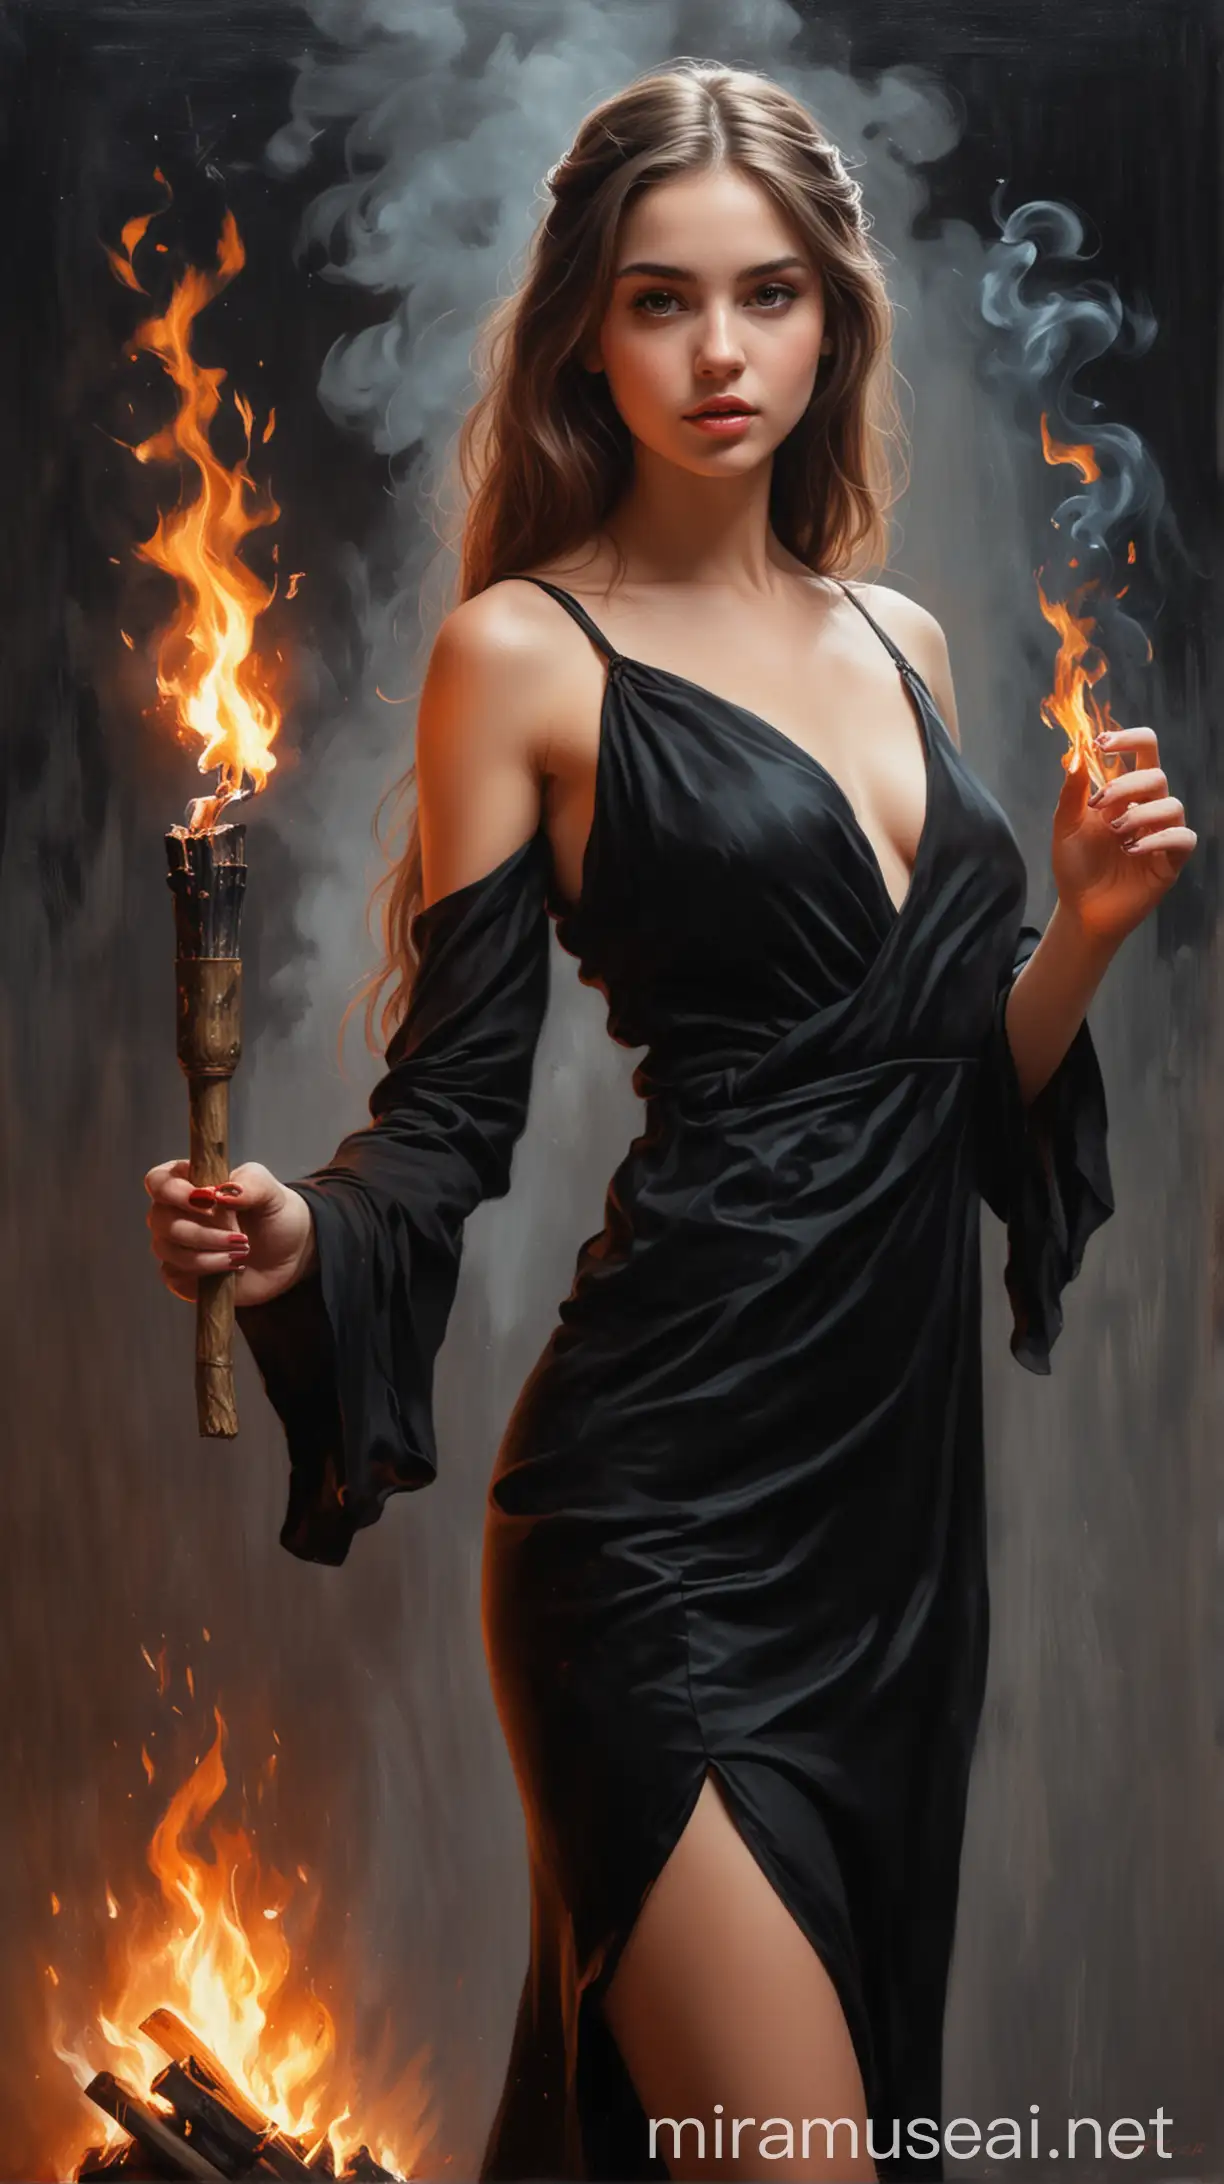 Seductive Young Woman in Black Dress Holding Fire